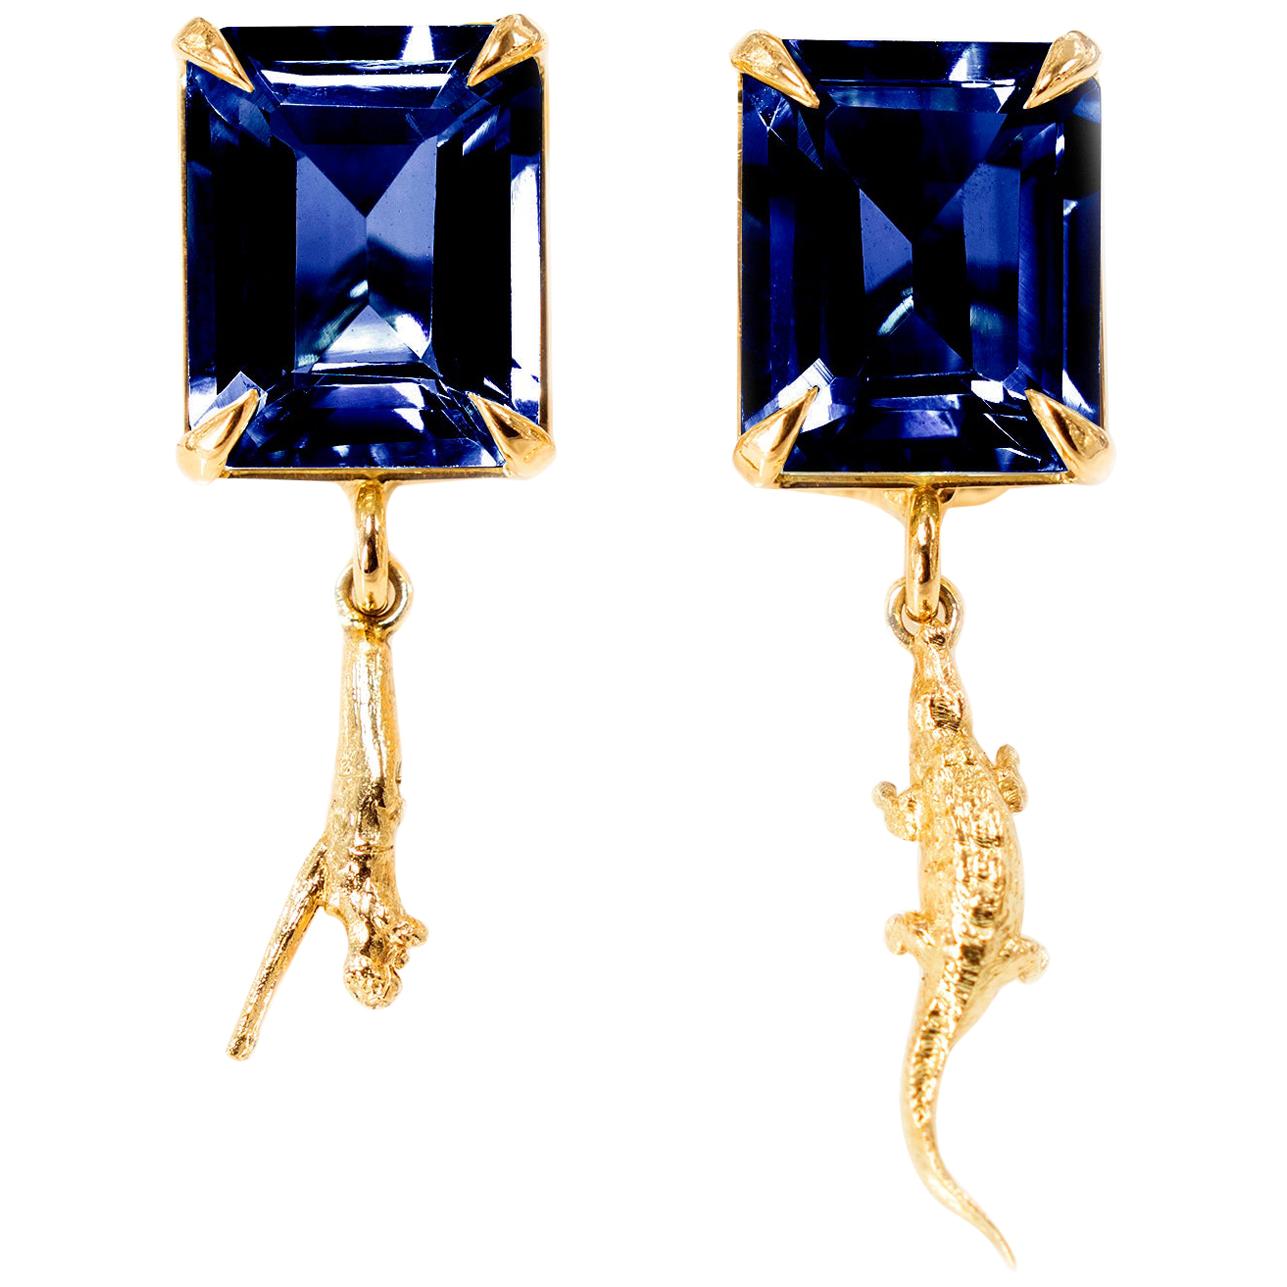 Eighteen Karat Yellow Gold Contemporary Stud Earrings with Sapphires